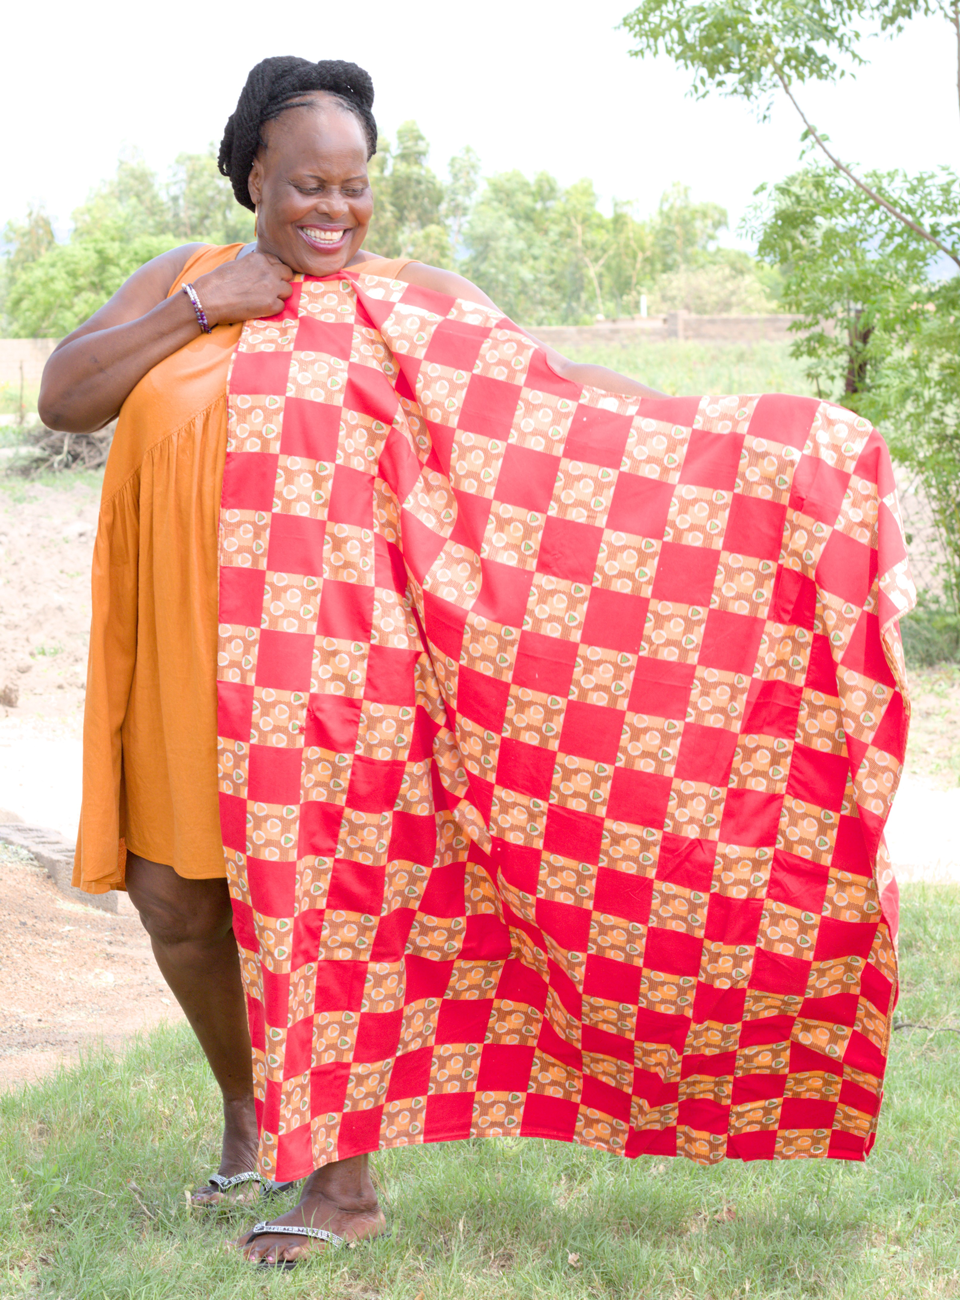 A female dressmaker, Aquila, holds out a red and orange cloth she designed and created on returning to work after her cataract surgery 